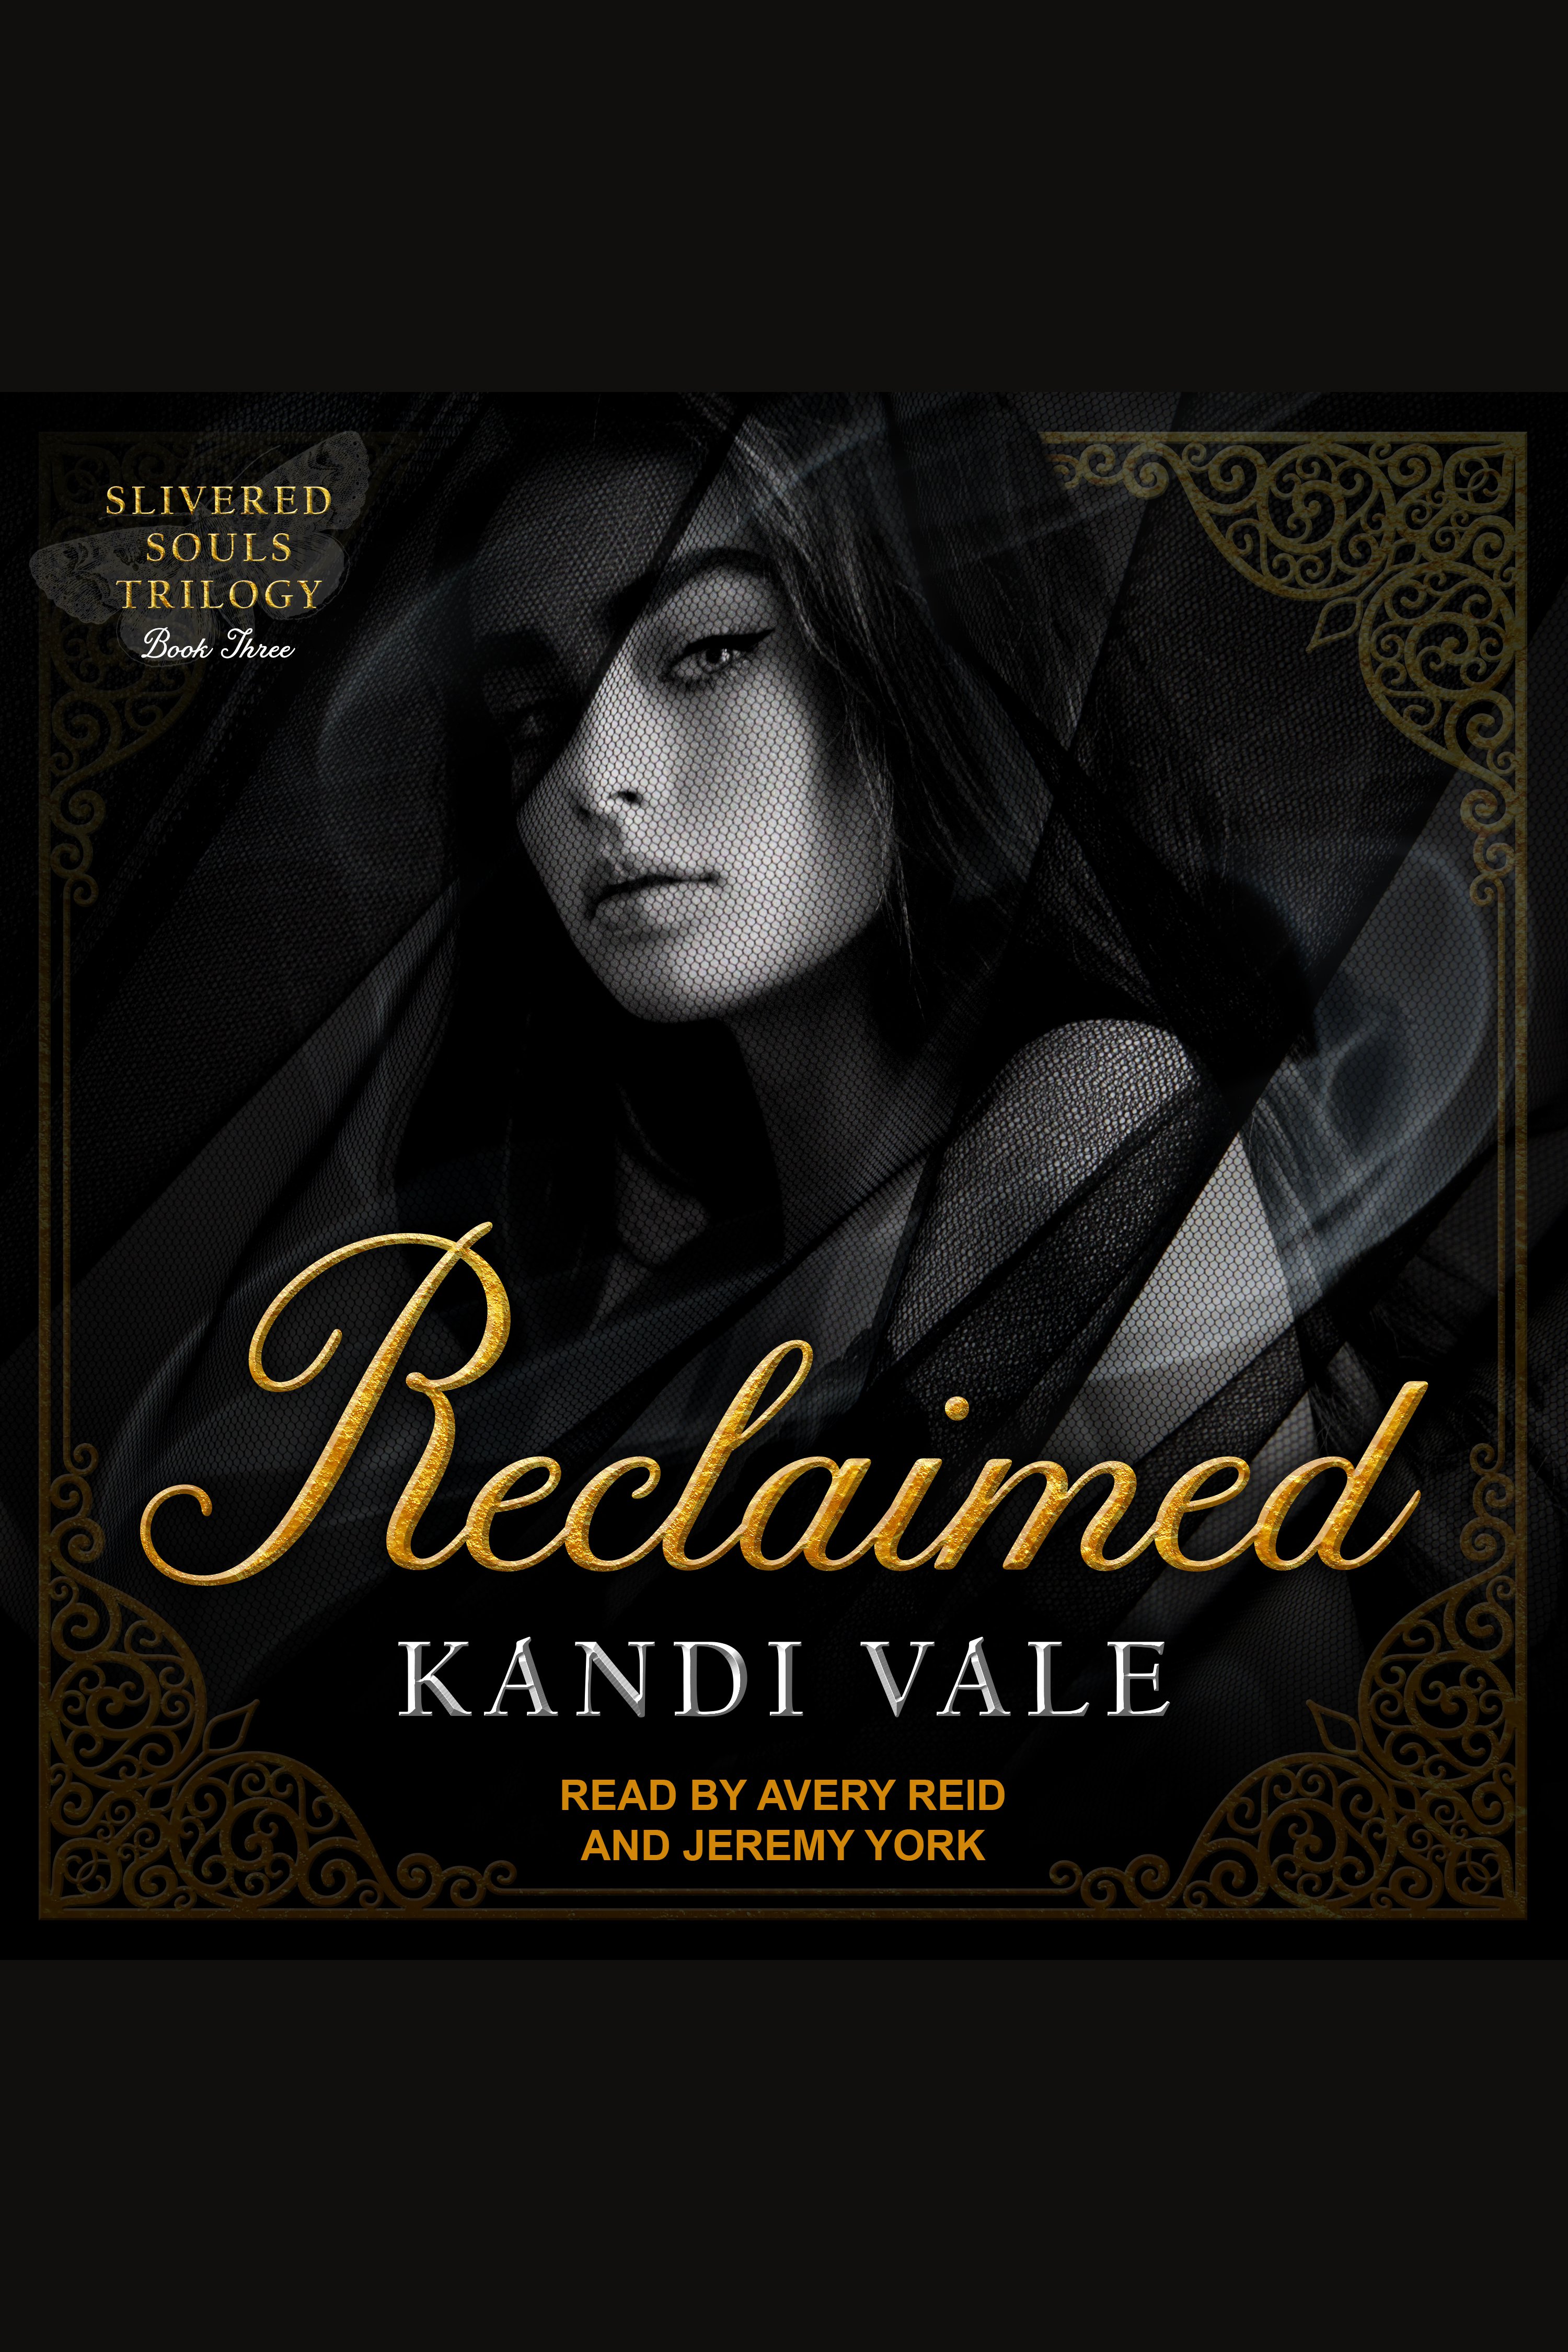 Reclaimed cover image